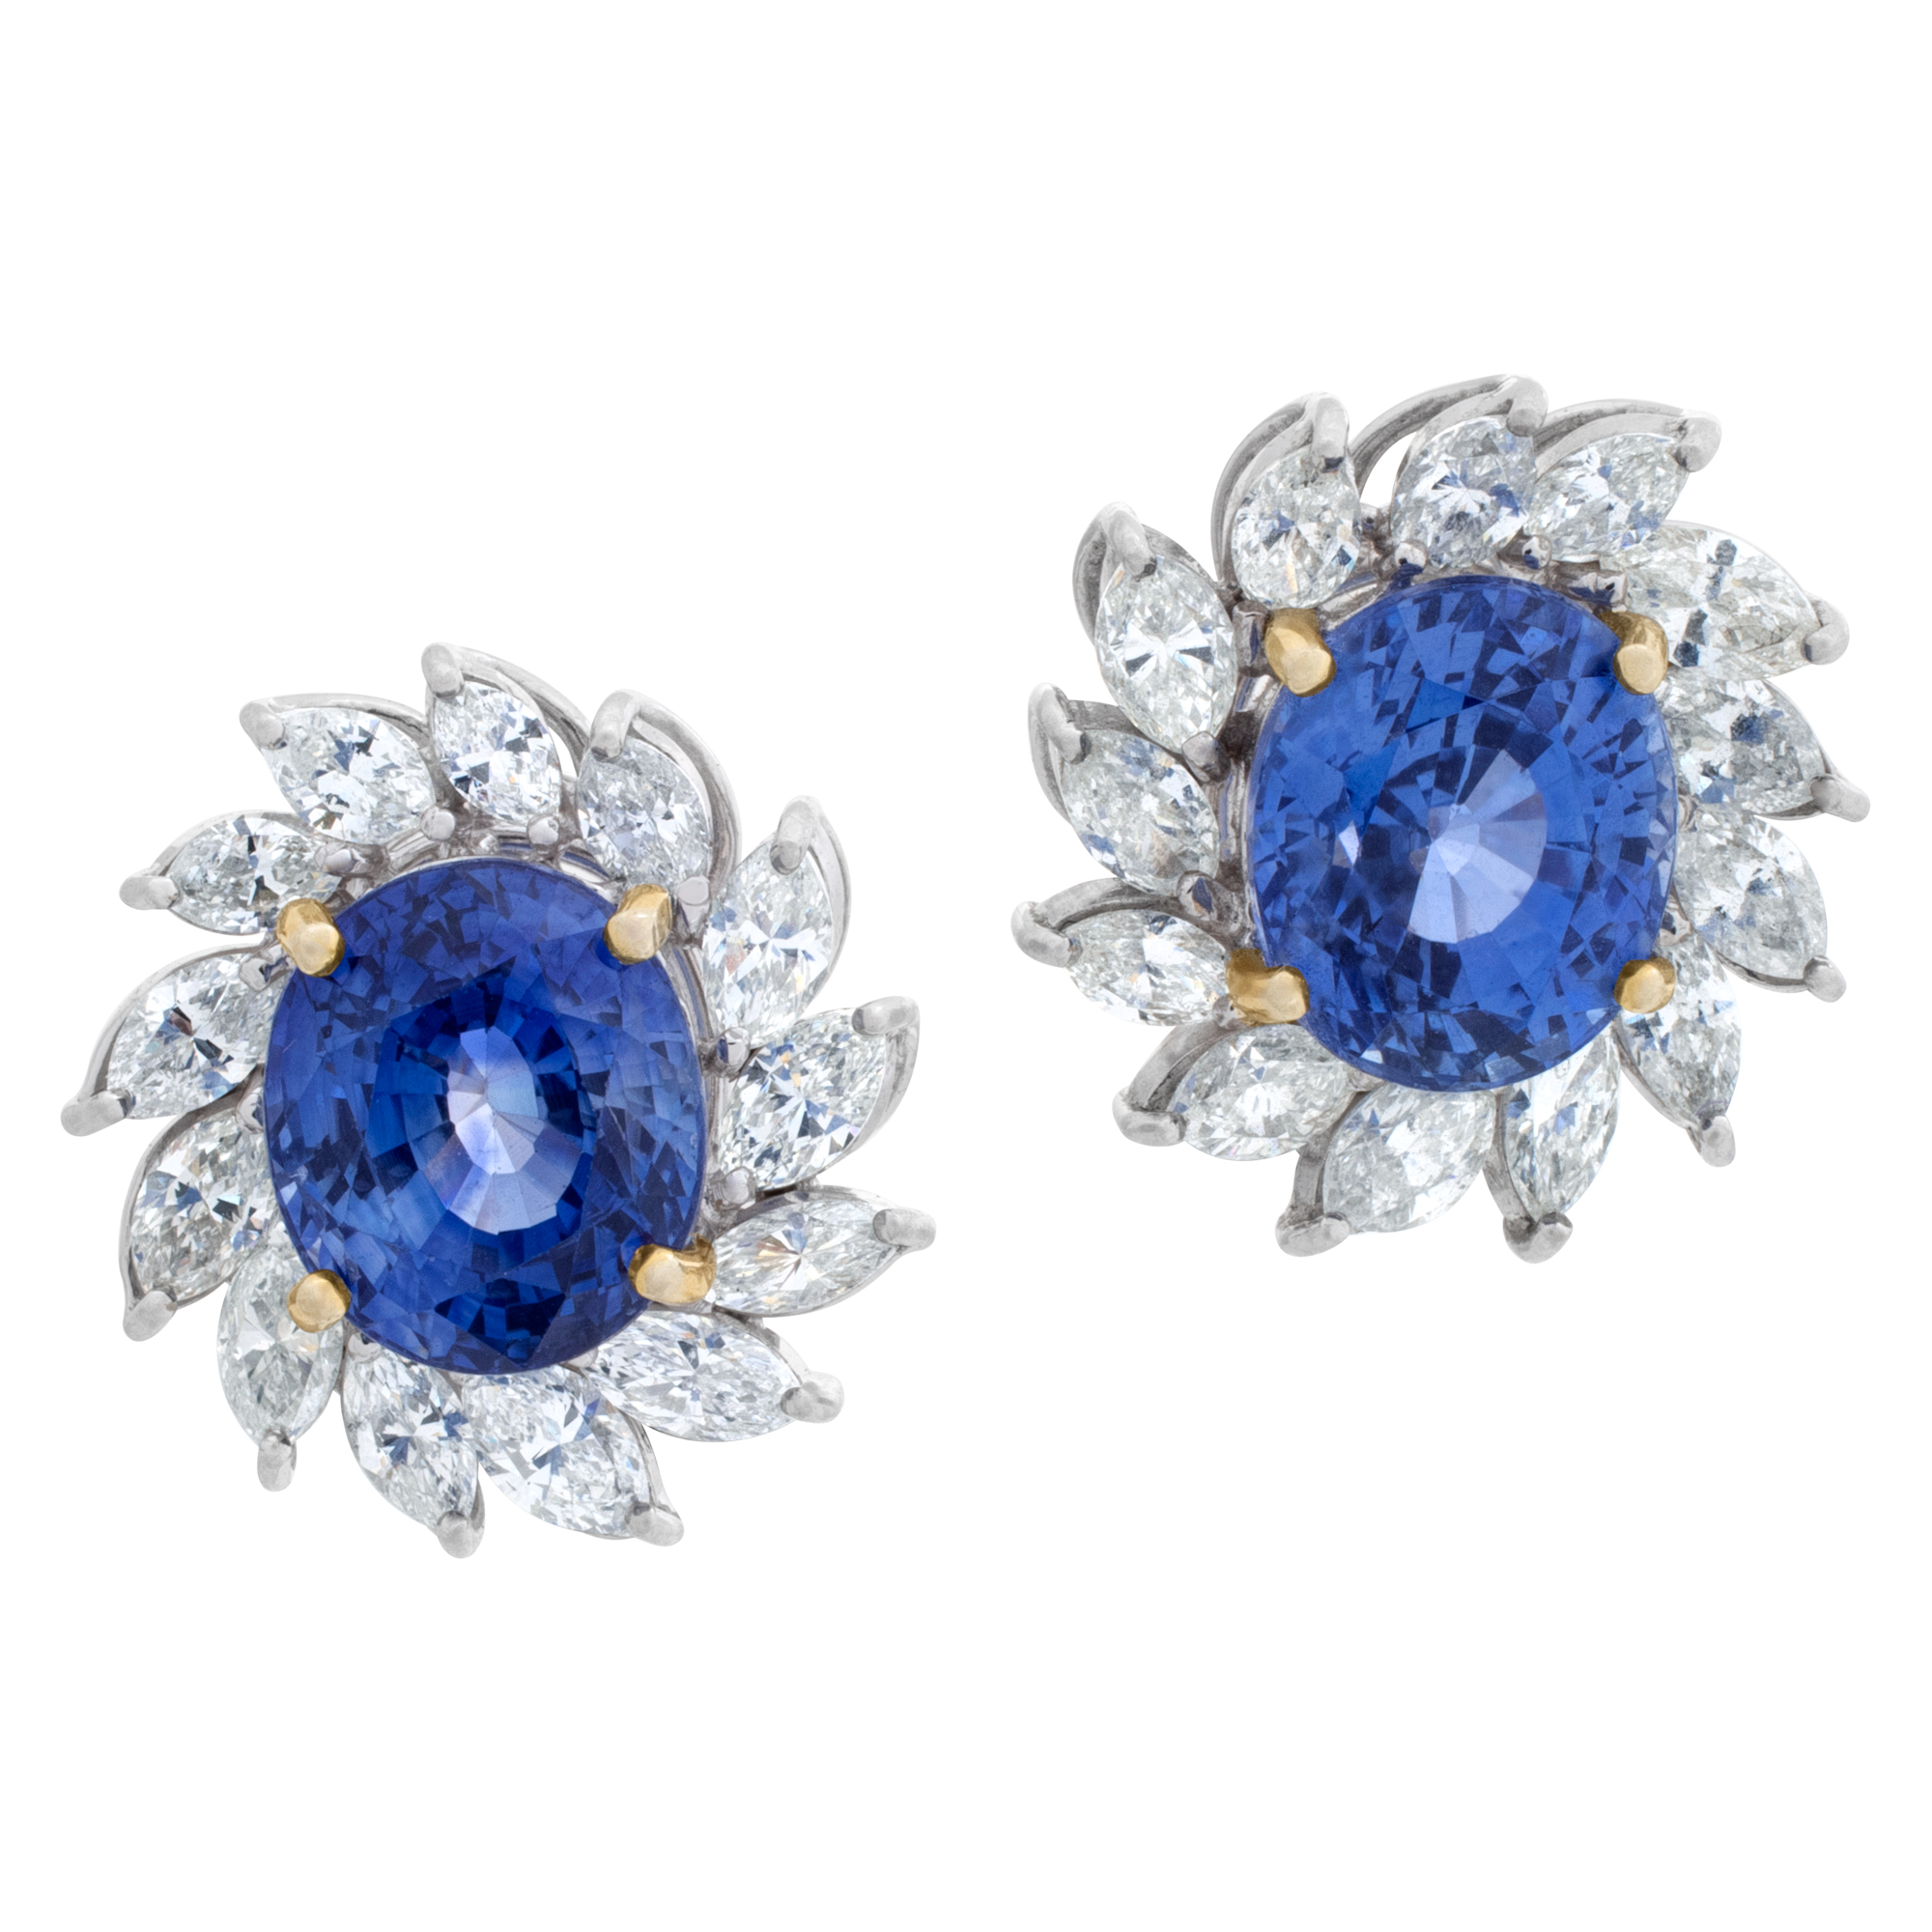 Blue sapphire and diamond earrings in 18k white gold